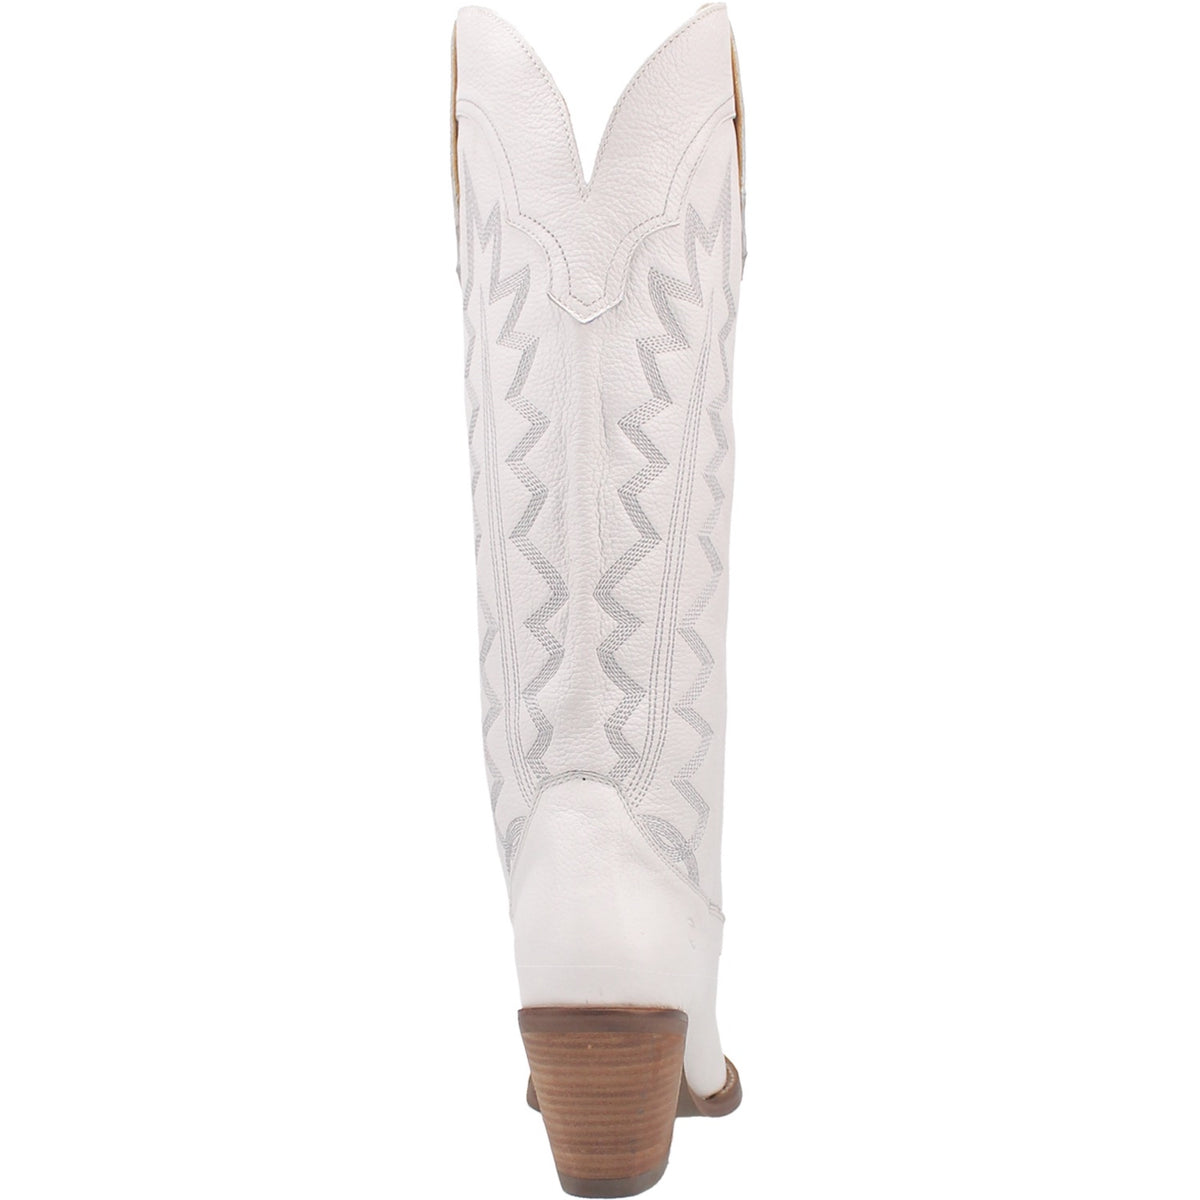 High Cotton Leather Boot in White